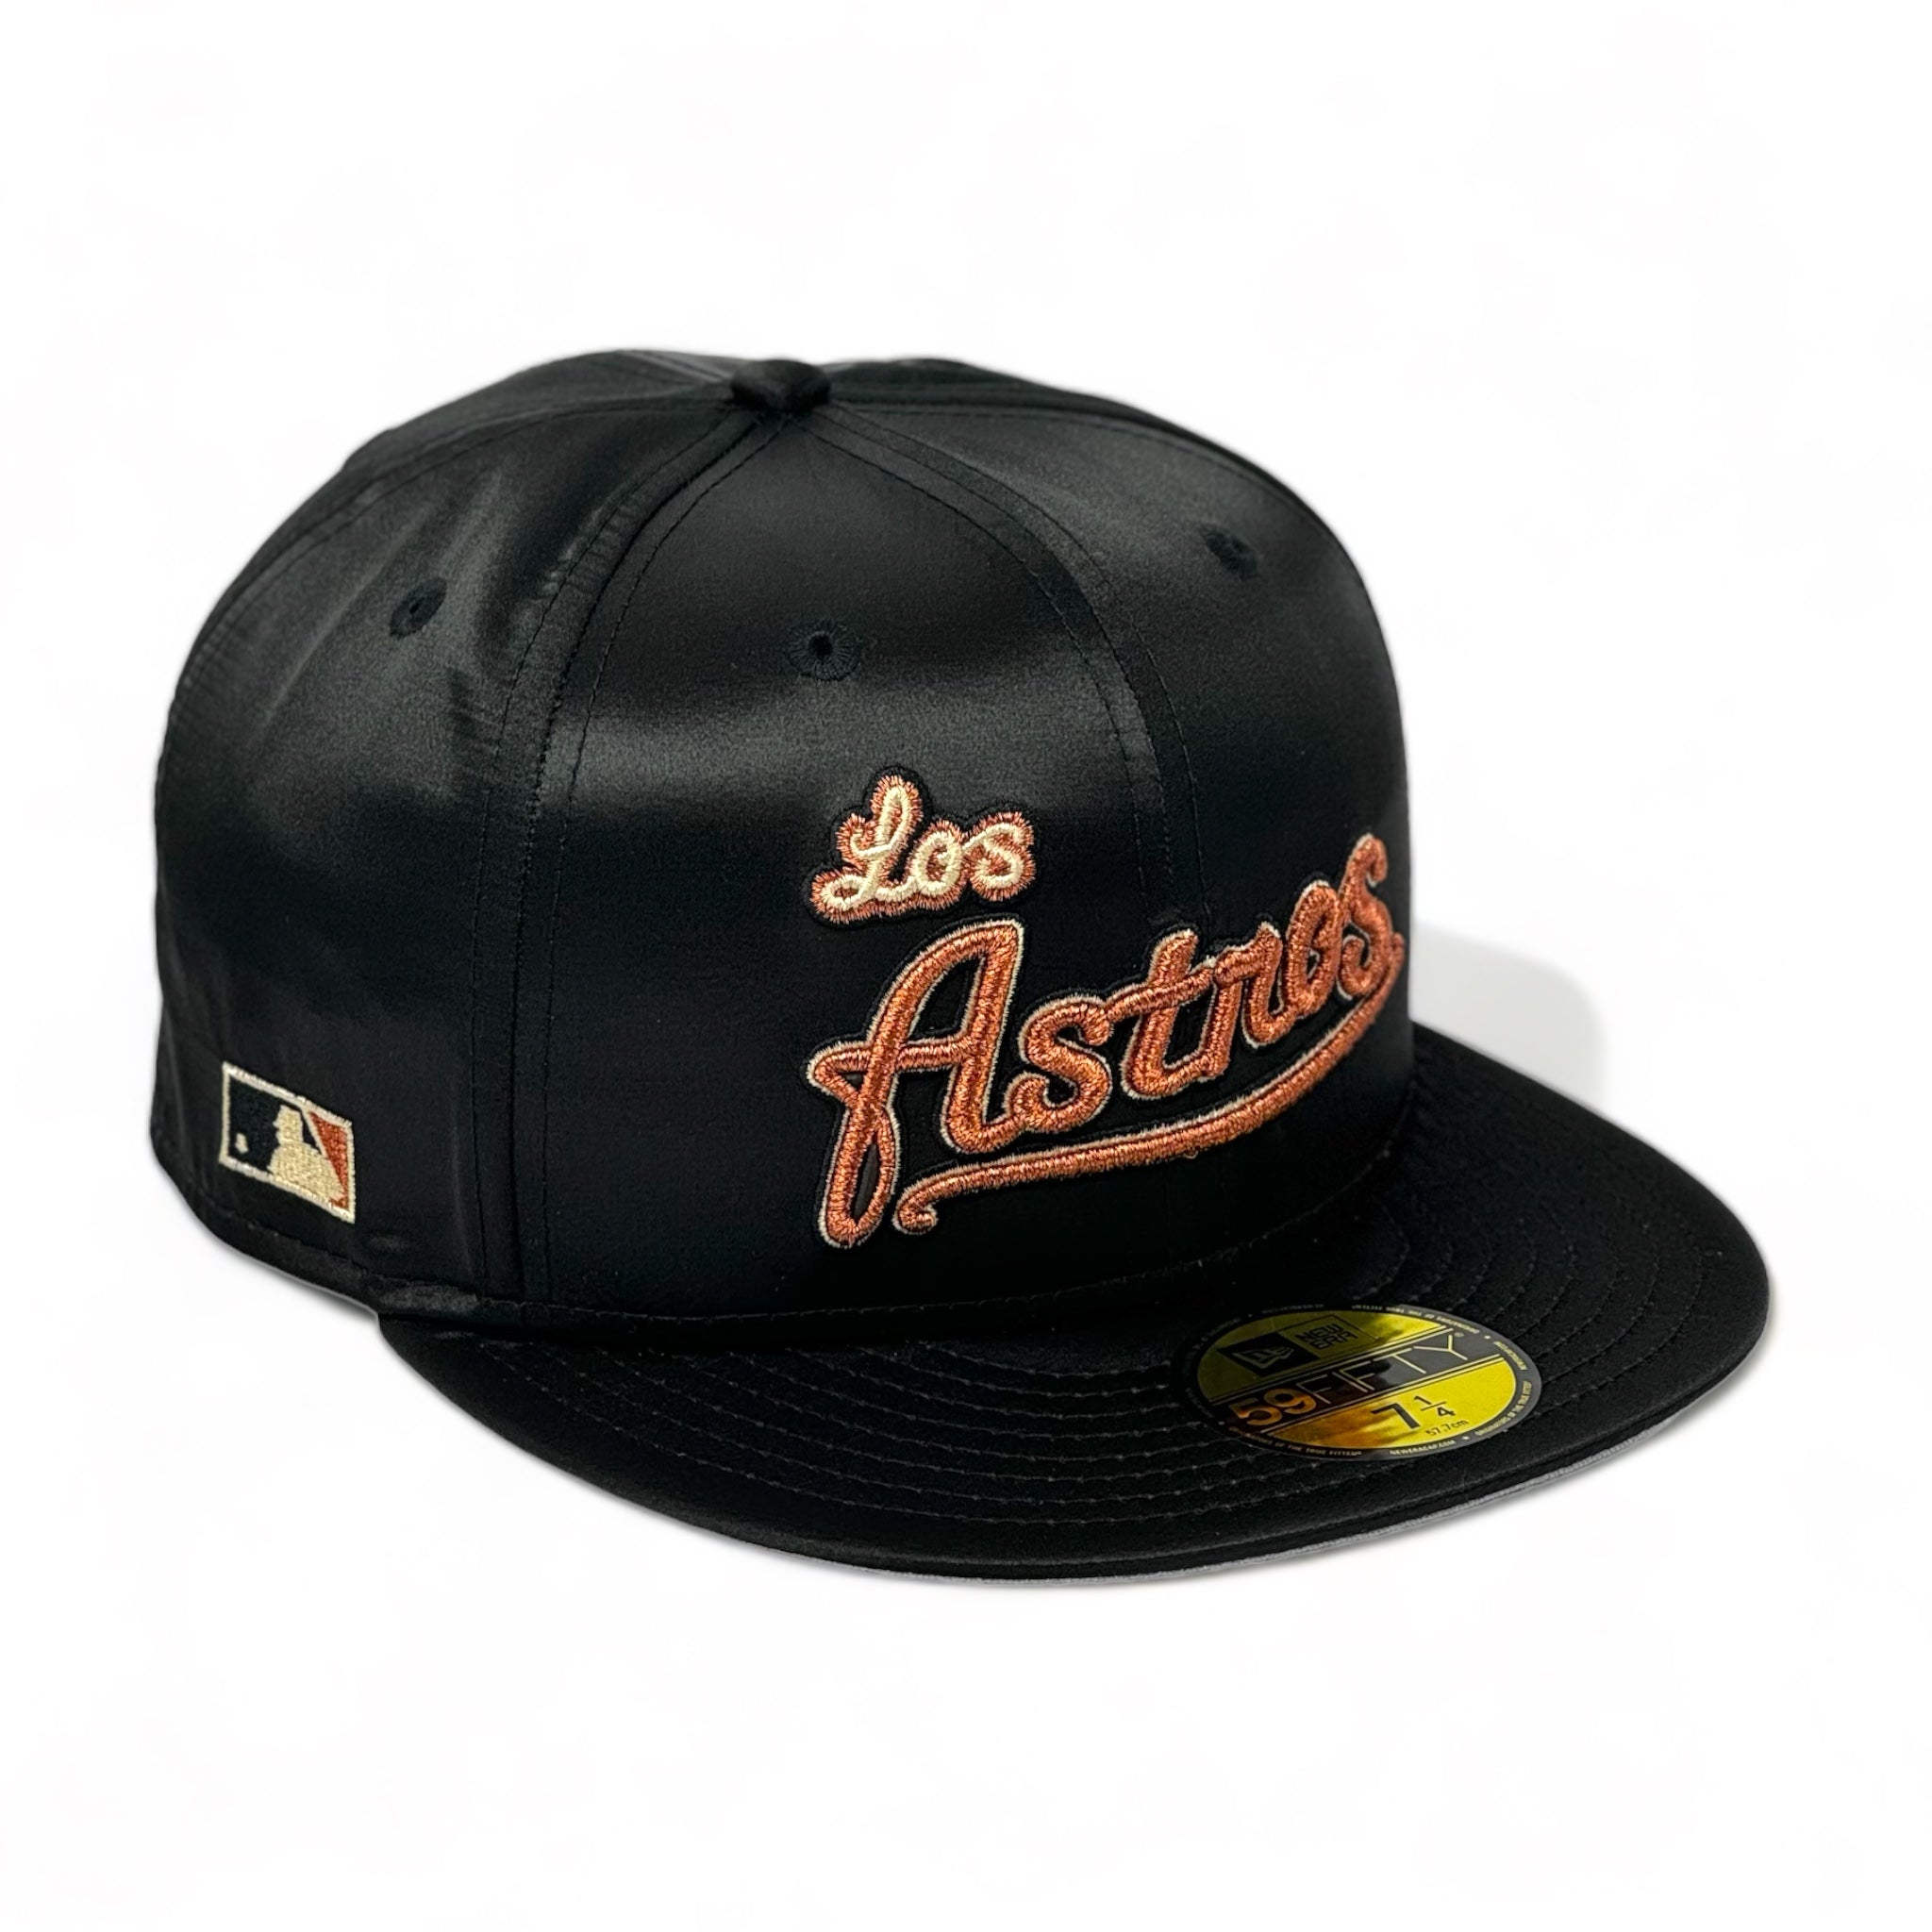 HOUSTON ASTROS (BLACK) "SATIN COLLECTION" NEW ERA 59FIFTY FITTED